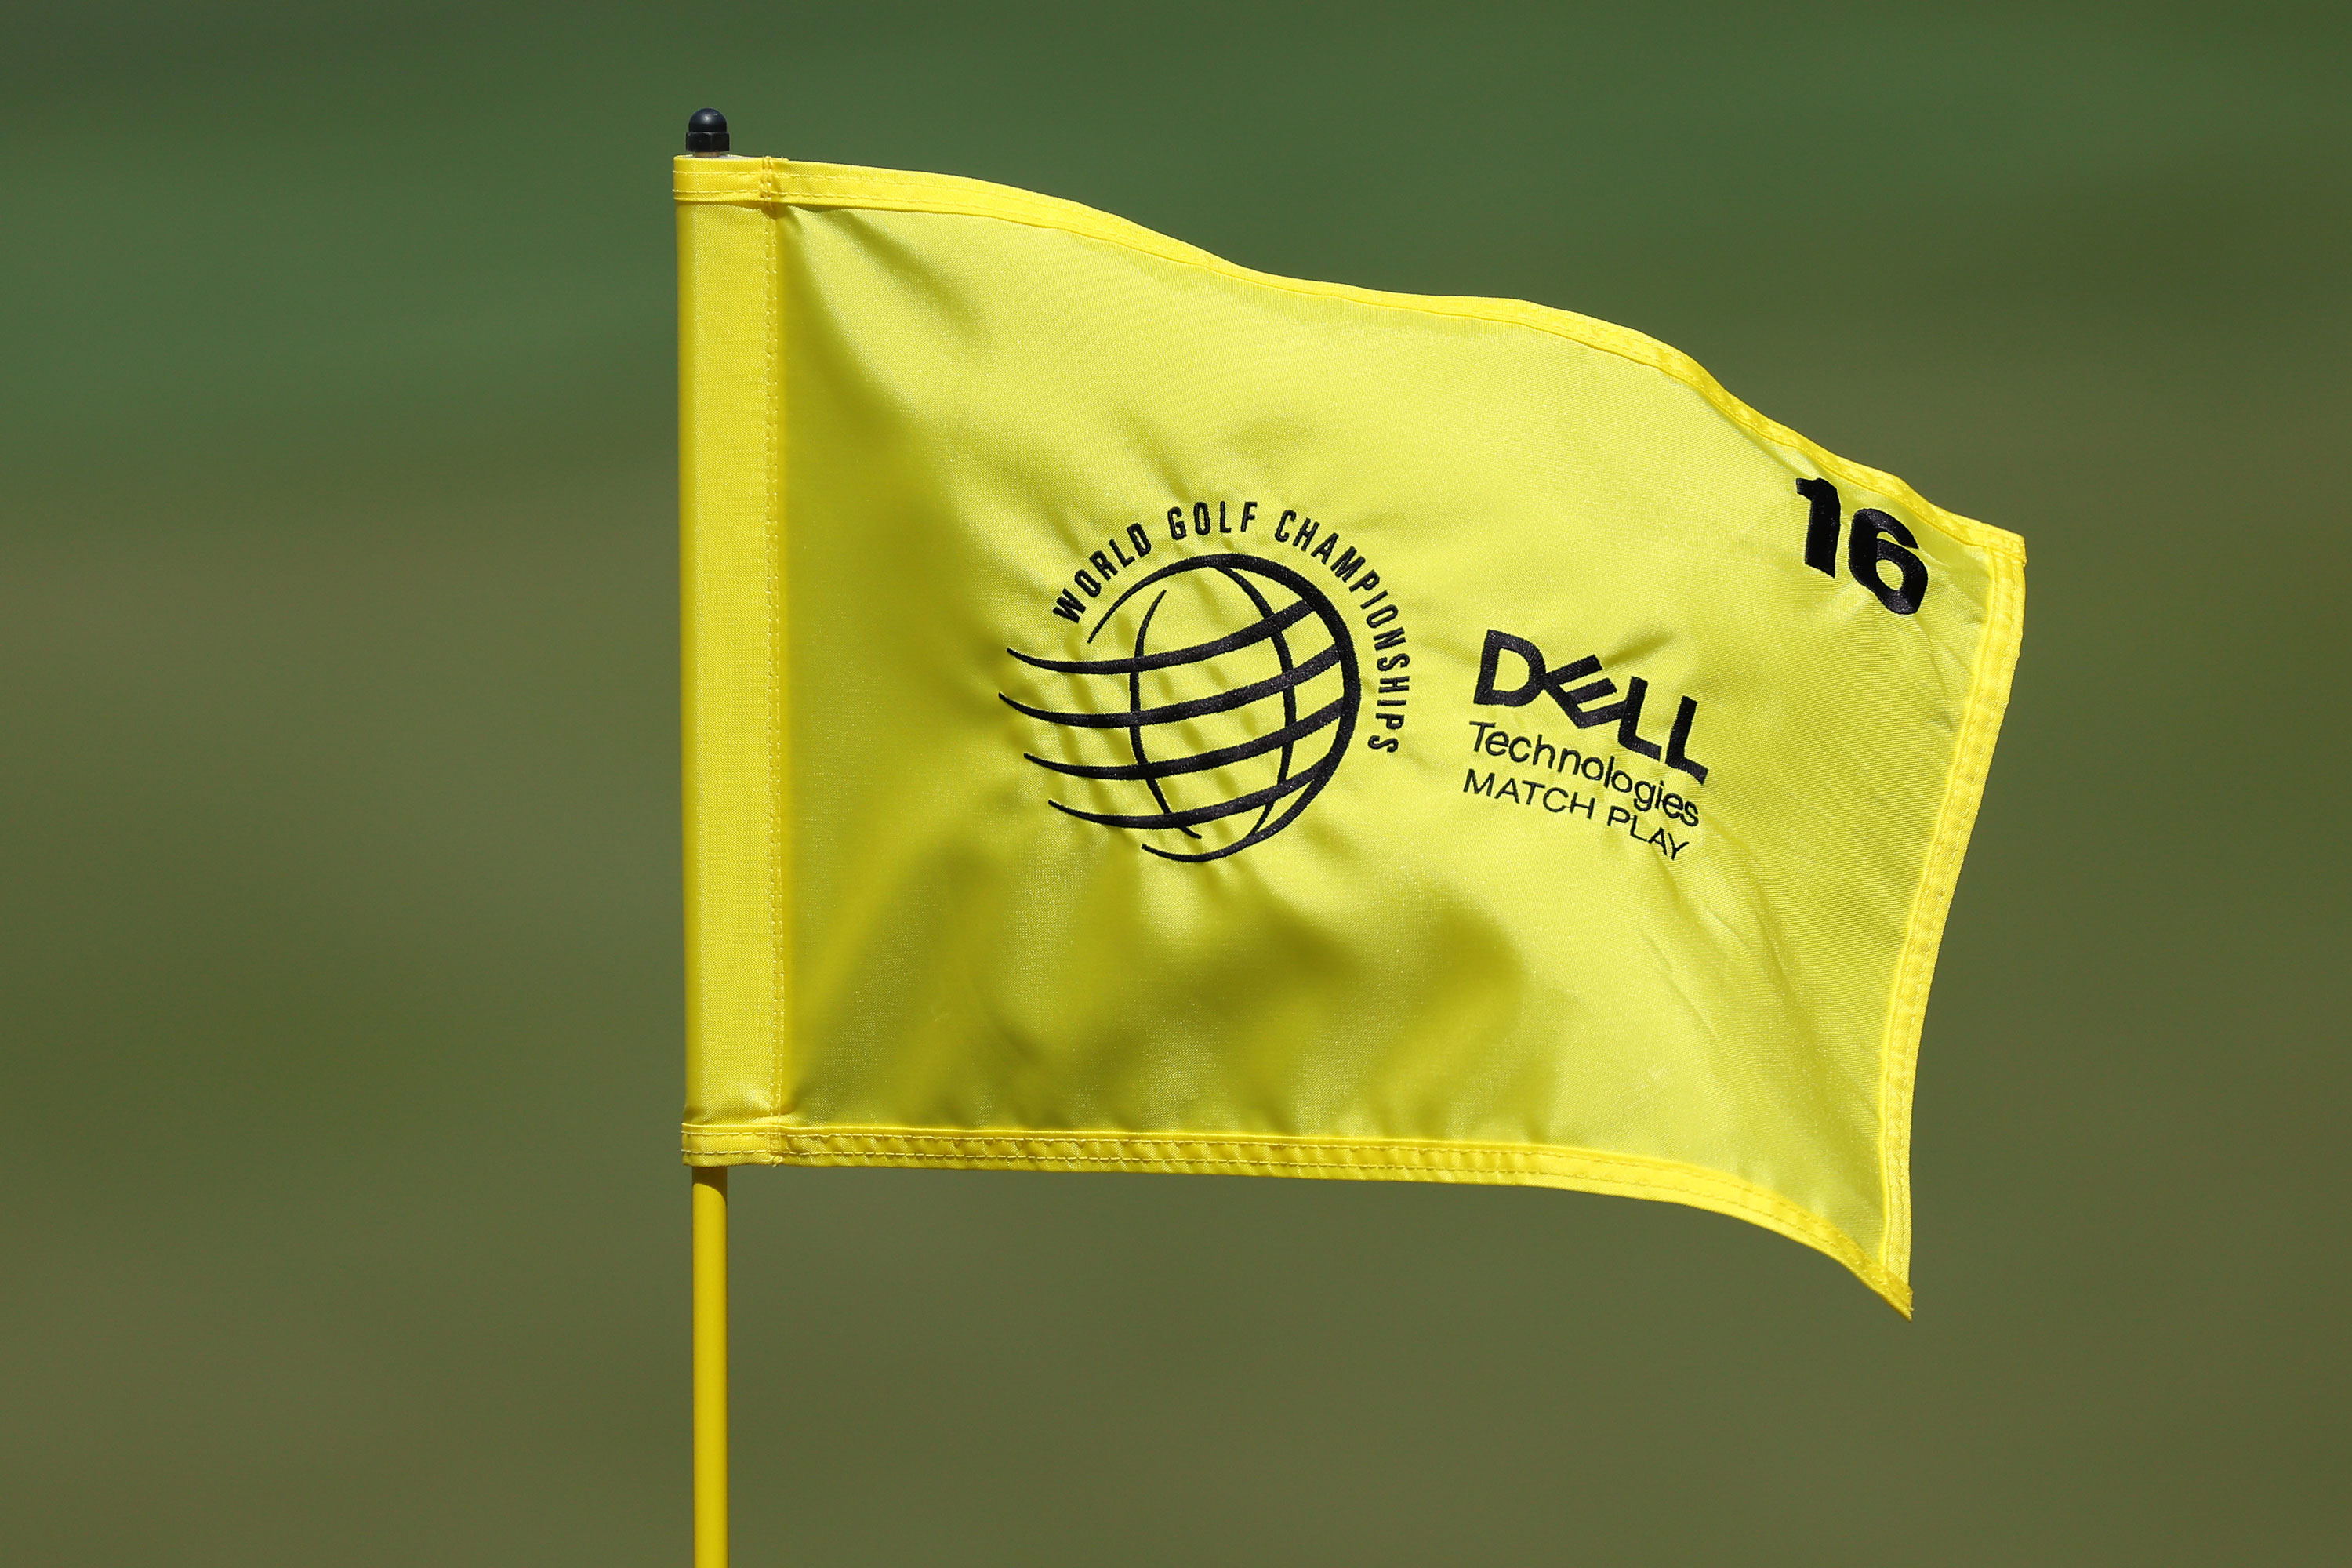 Perth International: How the World Super 6 works, match play rules, holes  and prize money, Golf, Sport